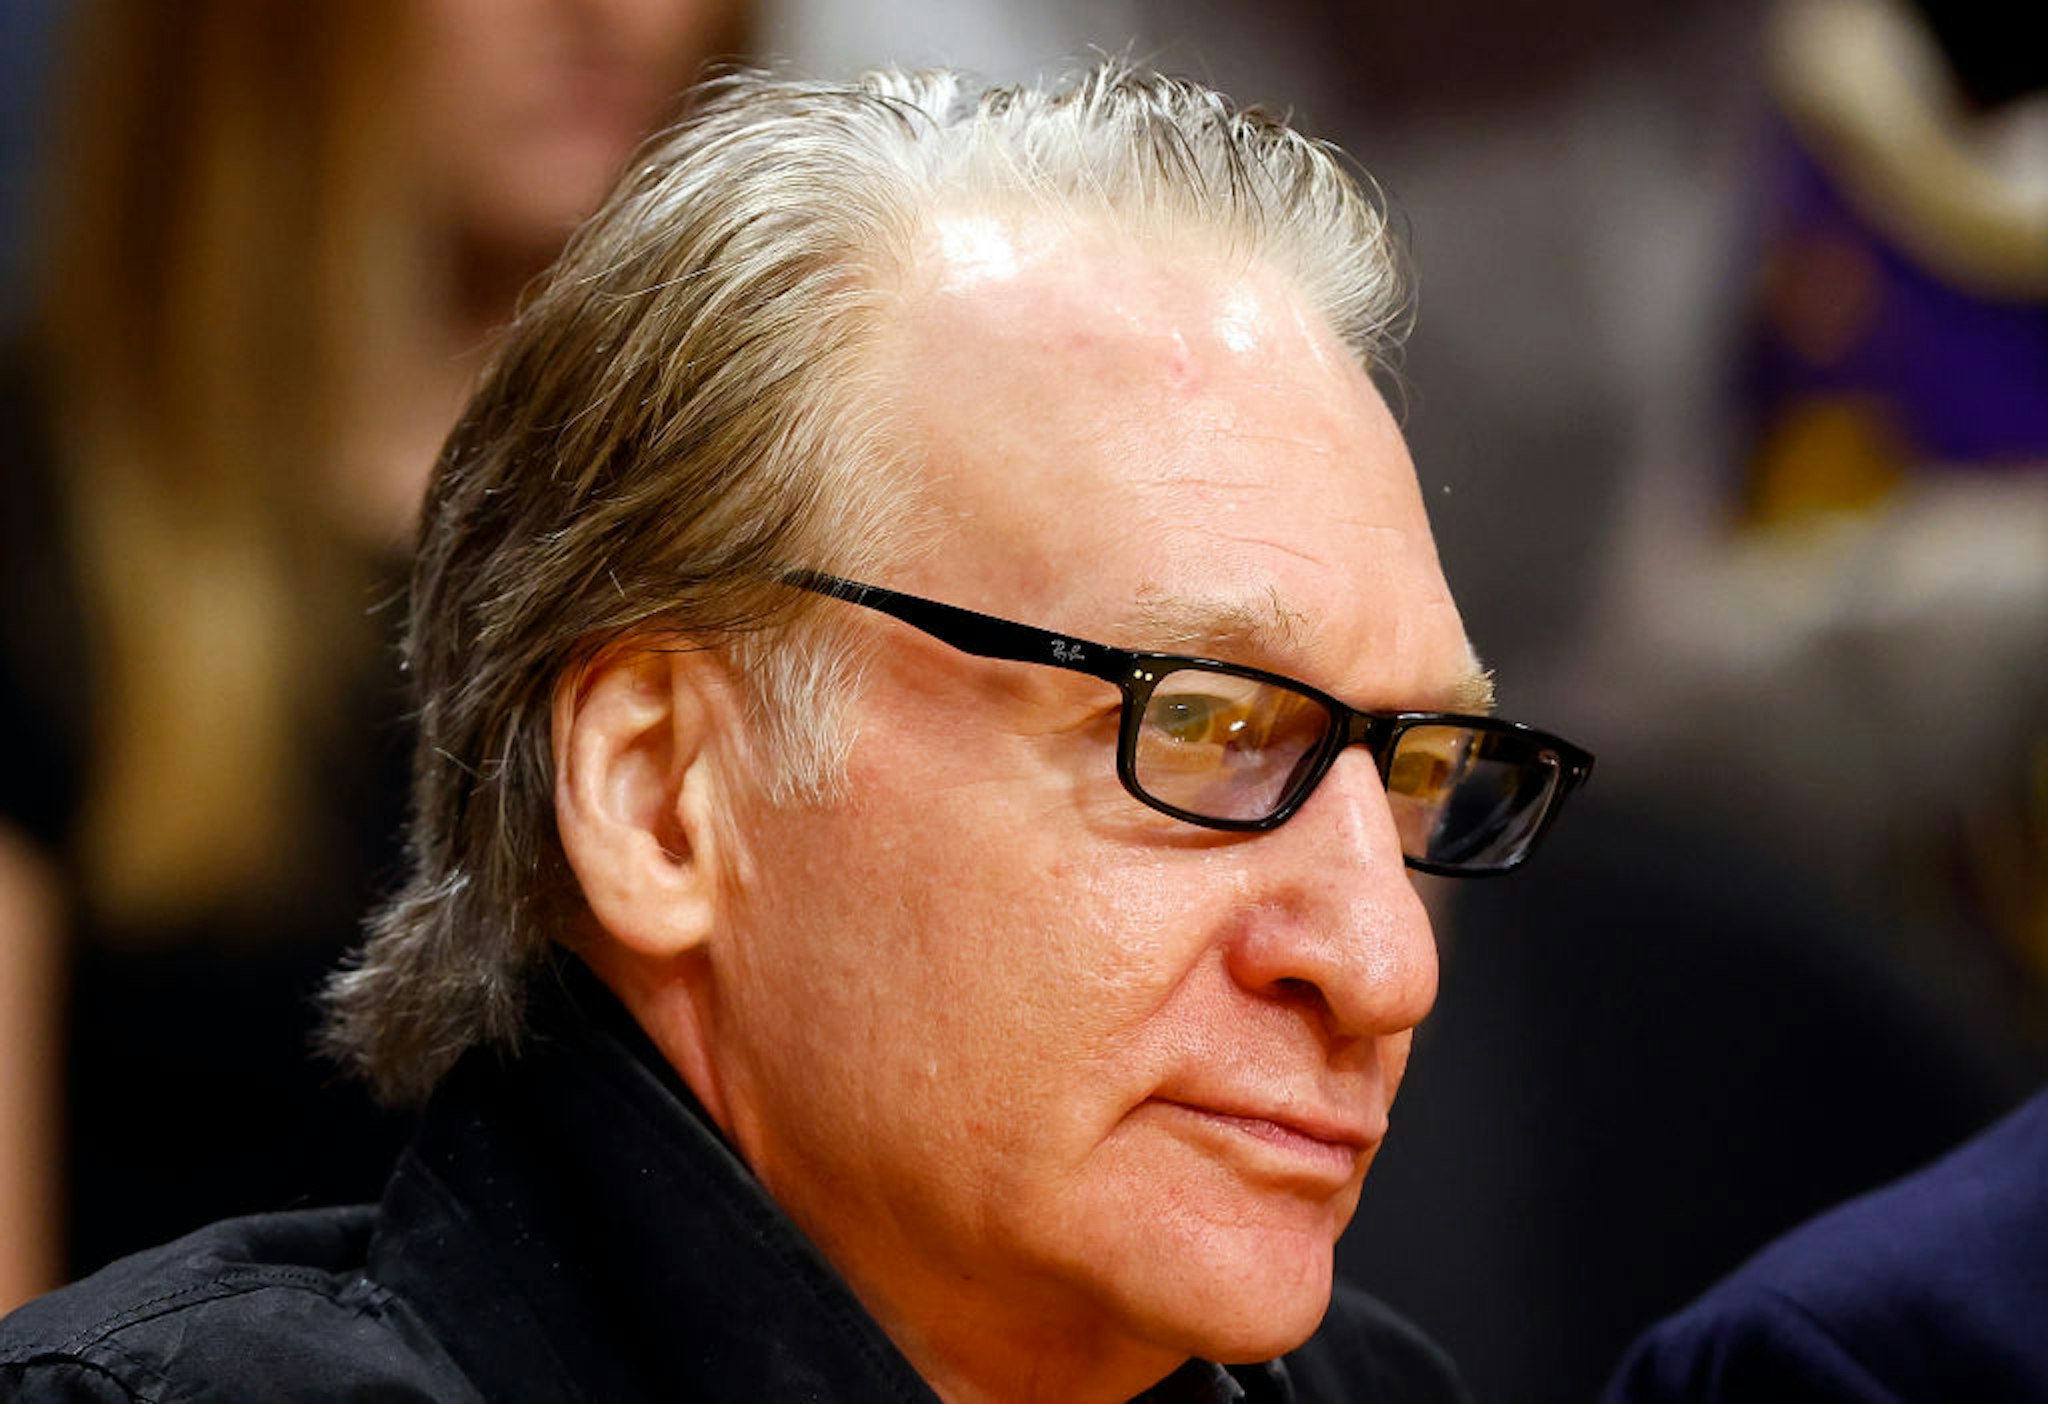 LOS ANGELES, CALIFORNIA - DECEMBER 02: Bill Maher attends a game between the Houston Rockets and the Los Angeles Lakers at Crypto.com Arena on December 02, 2023 in Los Angeles, California. NOTE TO USER: User expressly acknowledges and agrees that, by downloading and/or using this photograph, user is consenting to the terms and conditions of the Getty Images License Agreement. (Photo by Ronald Martinez/Getty Images)